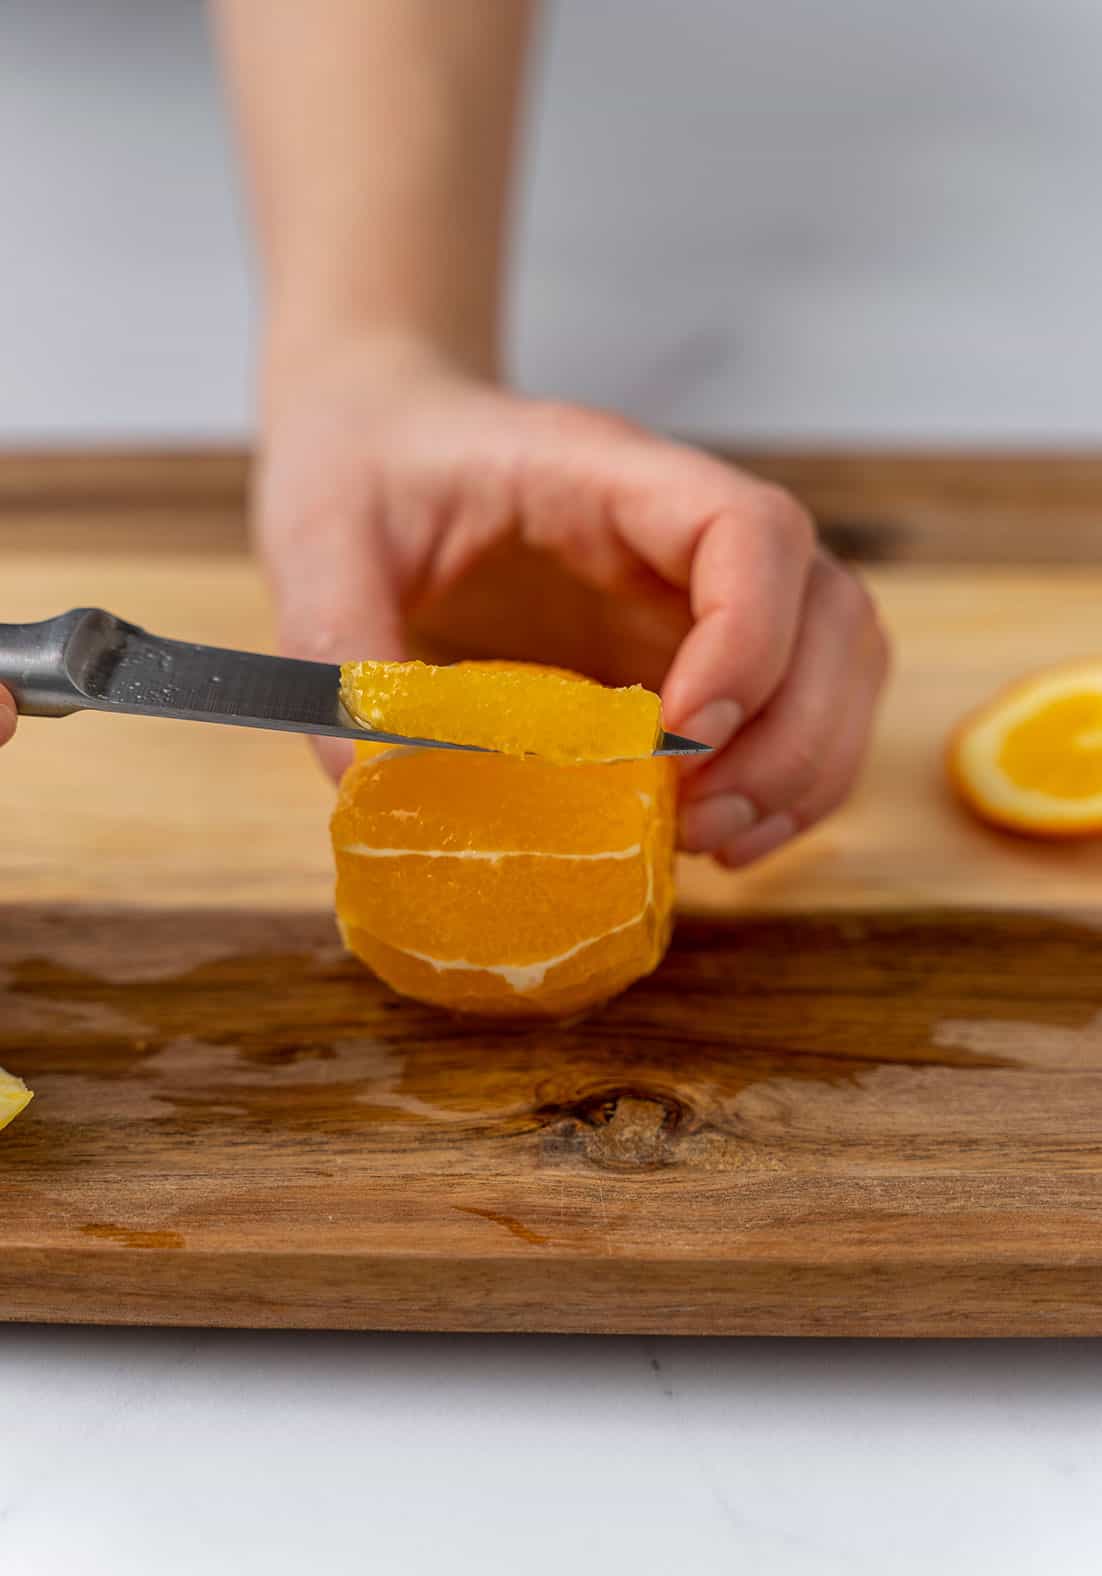 slicing the orange with knife 